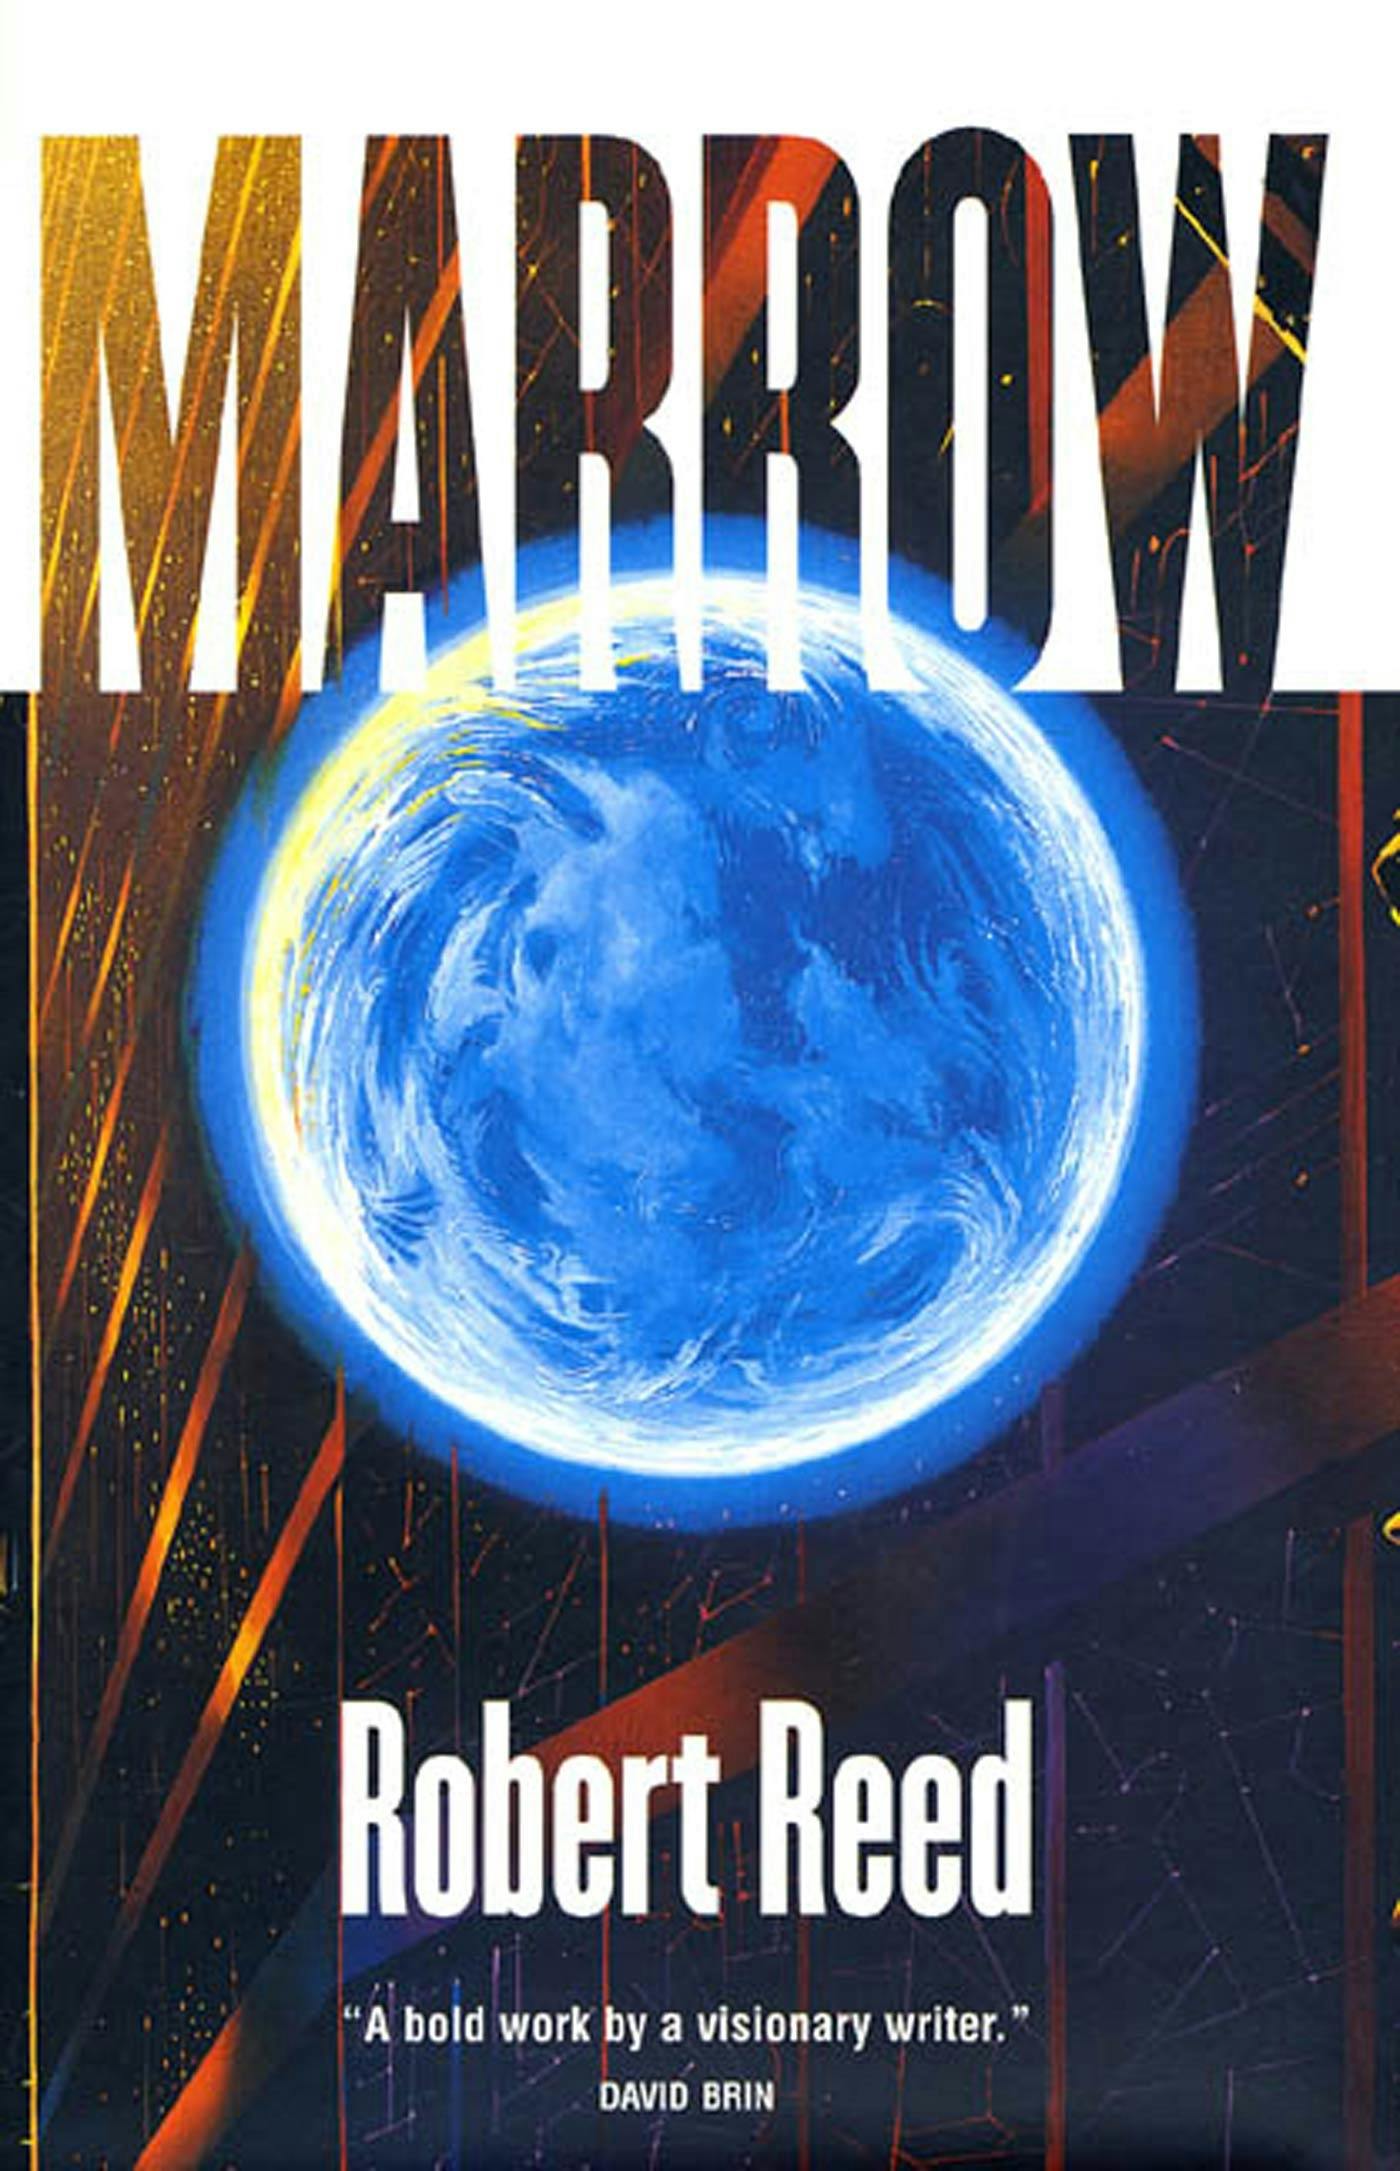 Cover for the book titled as: Marrow